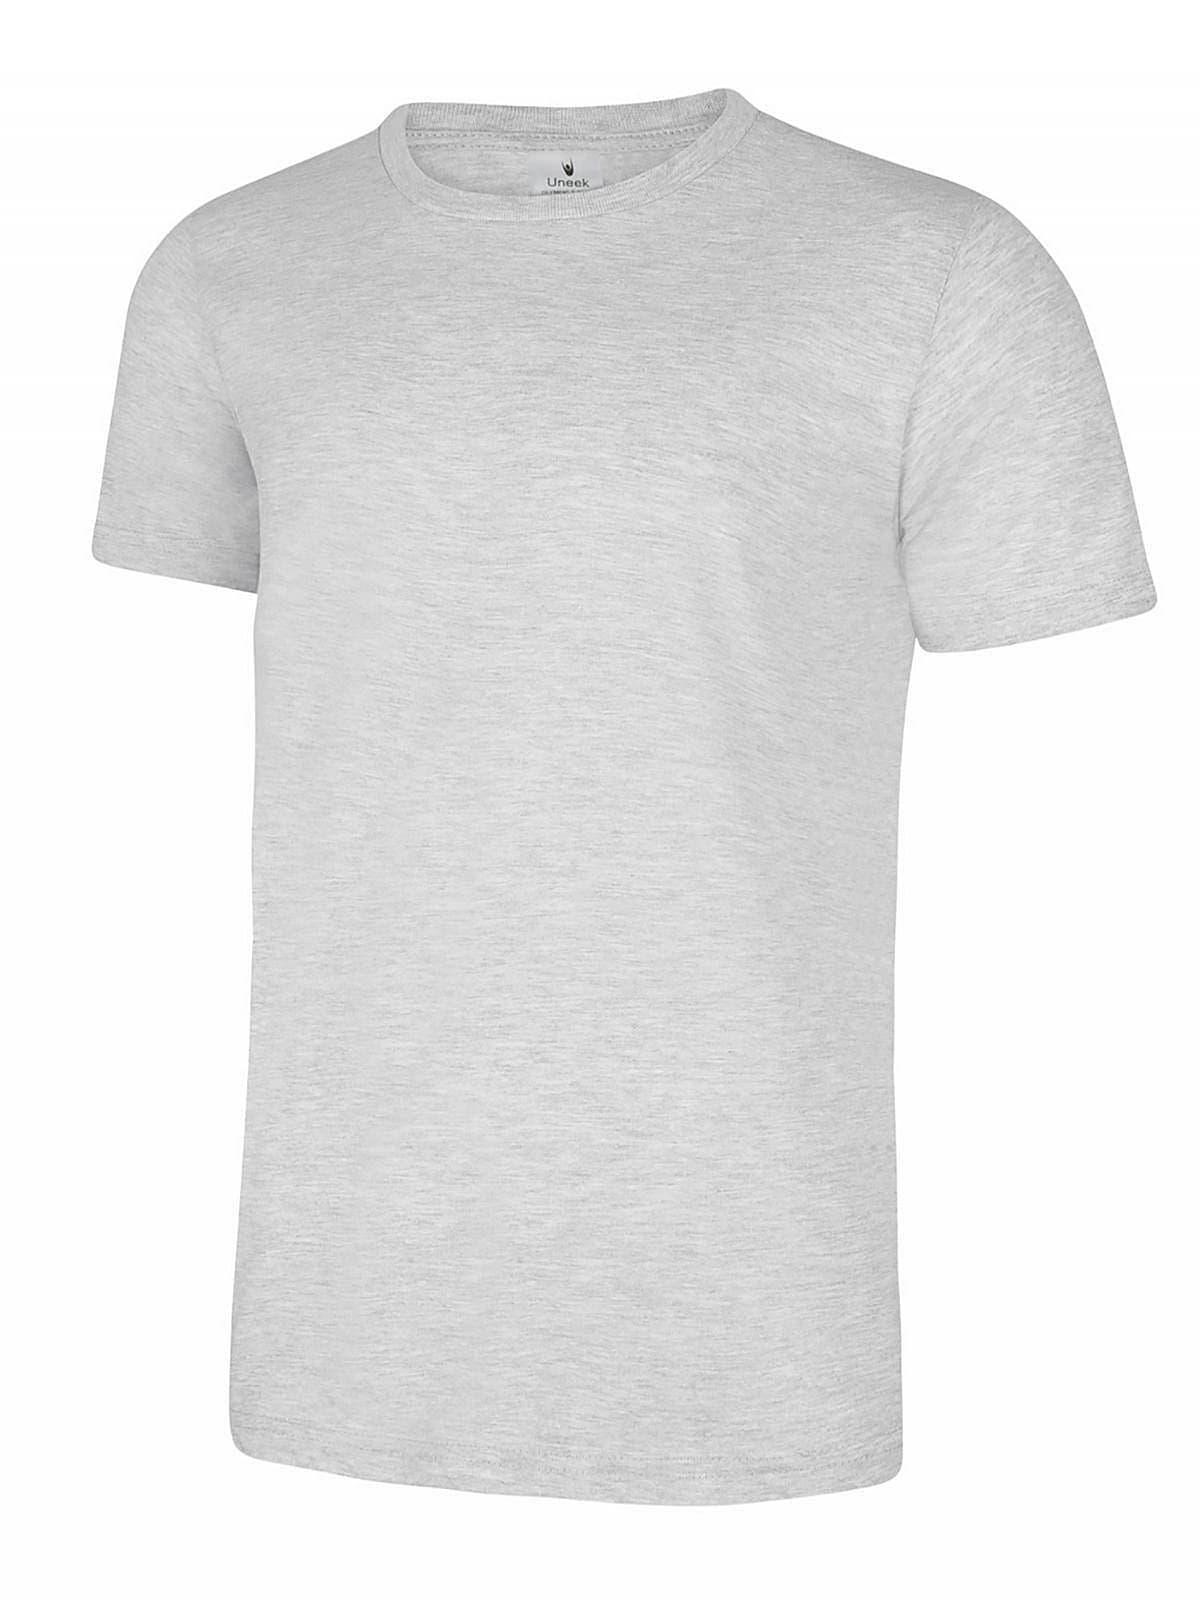 Uneek 150GSM Olympic T-Shirt in Heather Grey (Product Code: UC320)